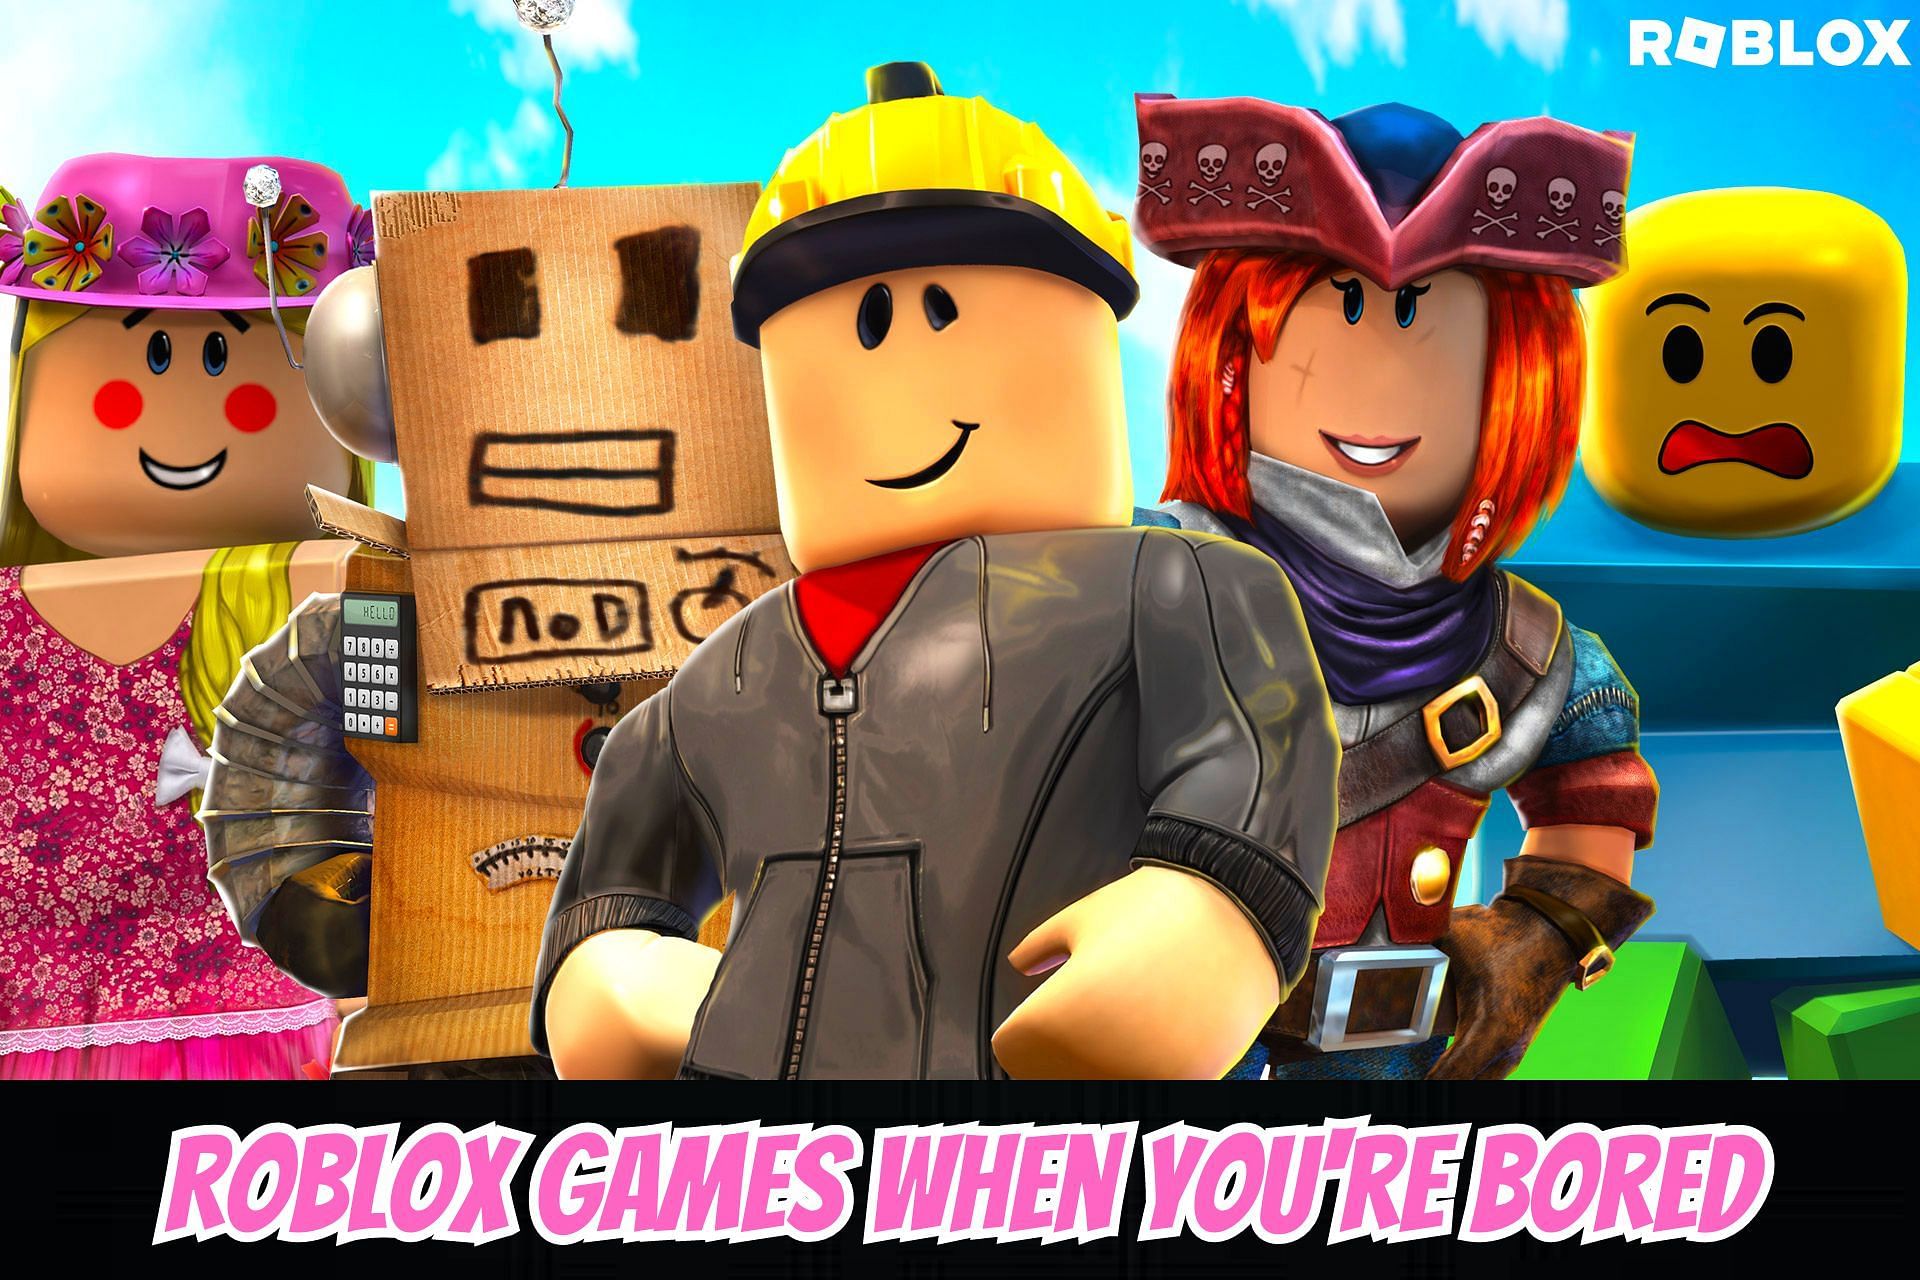 Underrated Roblox Games to Play When You're Bored